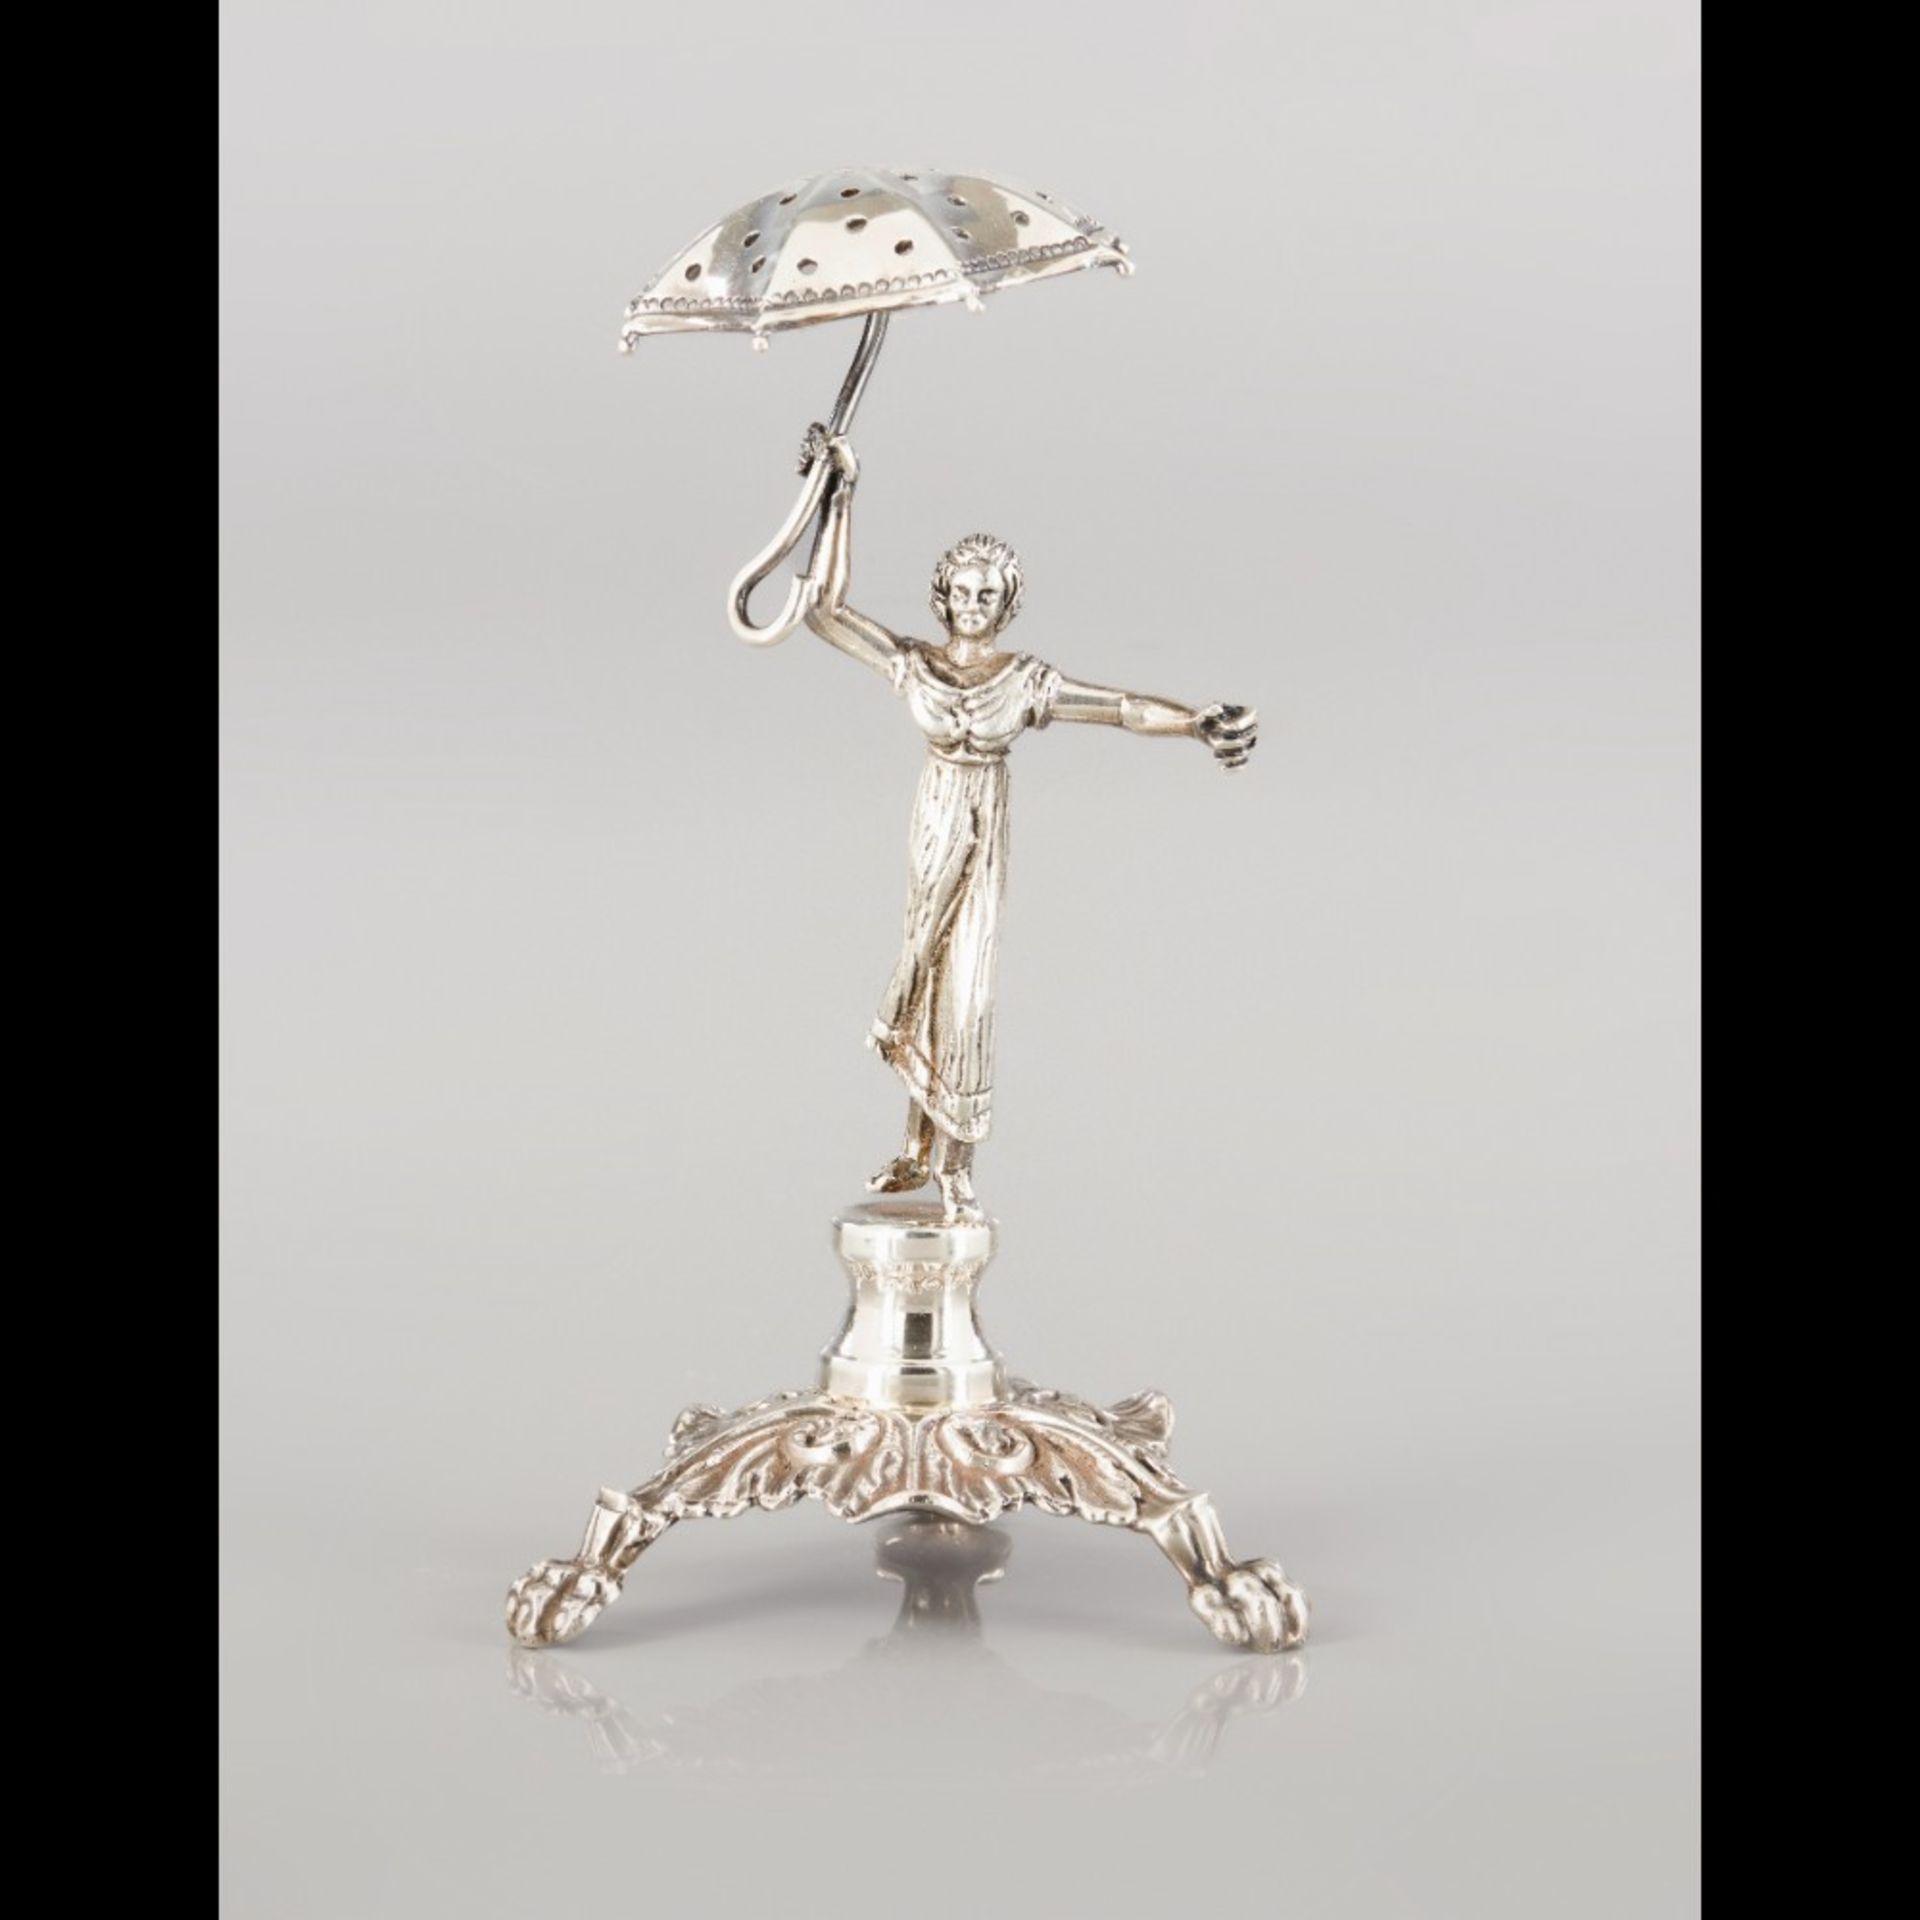  A "Lady with an umbrella" Toothpick Holder